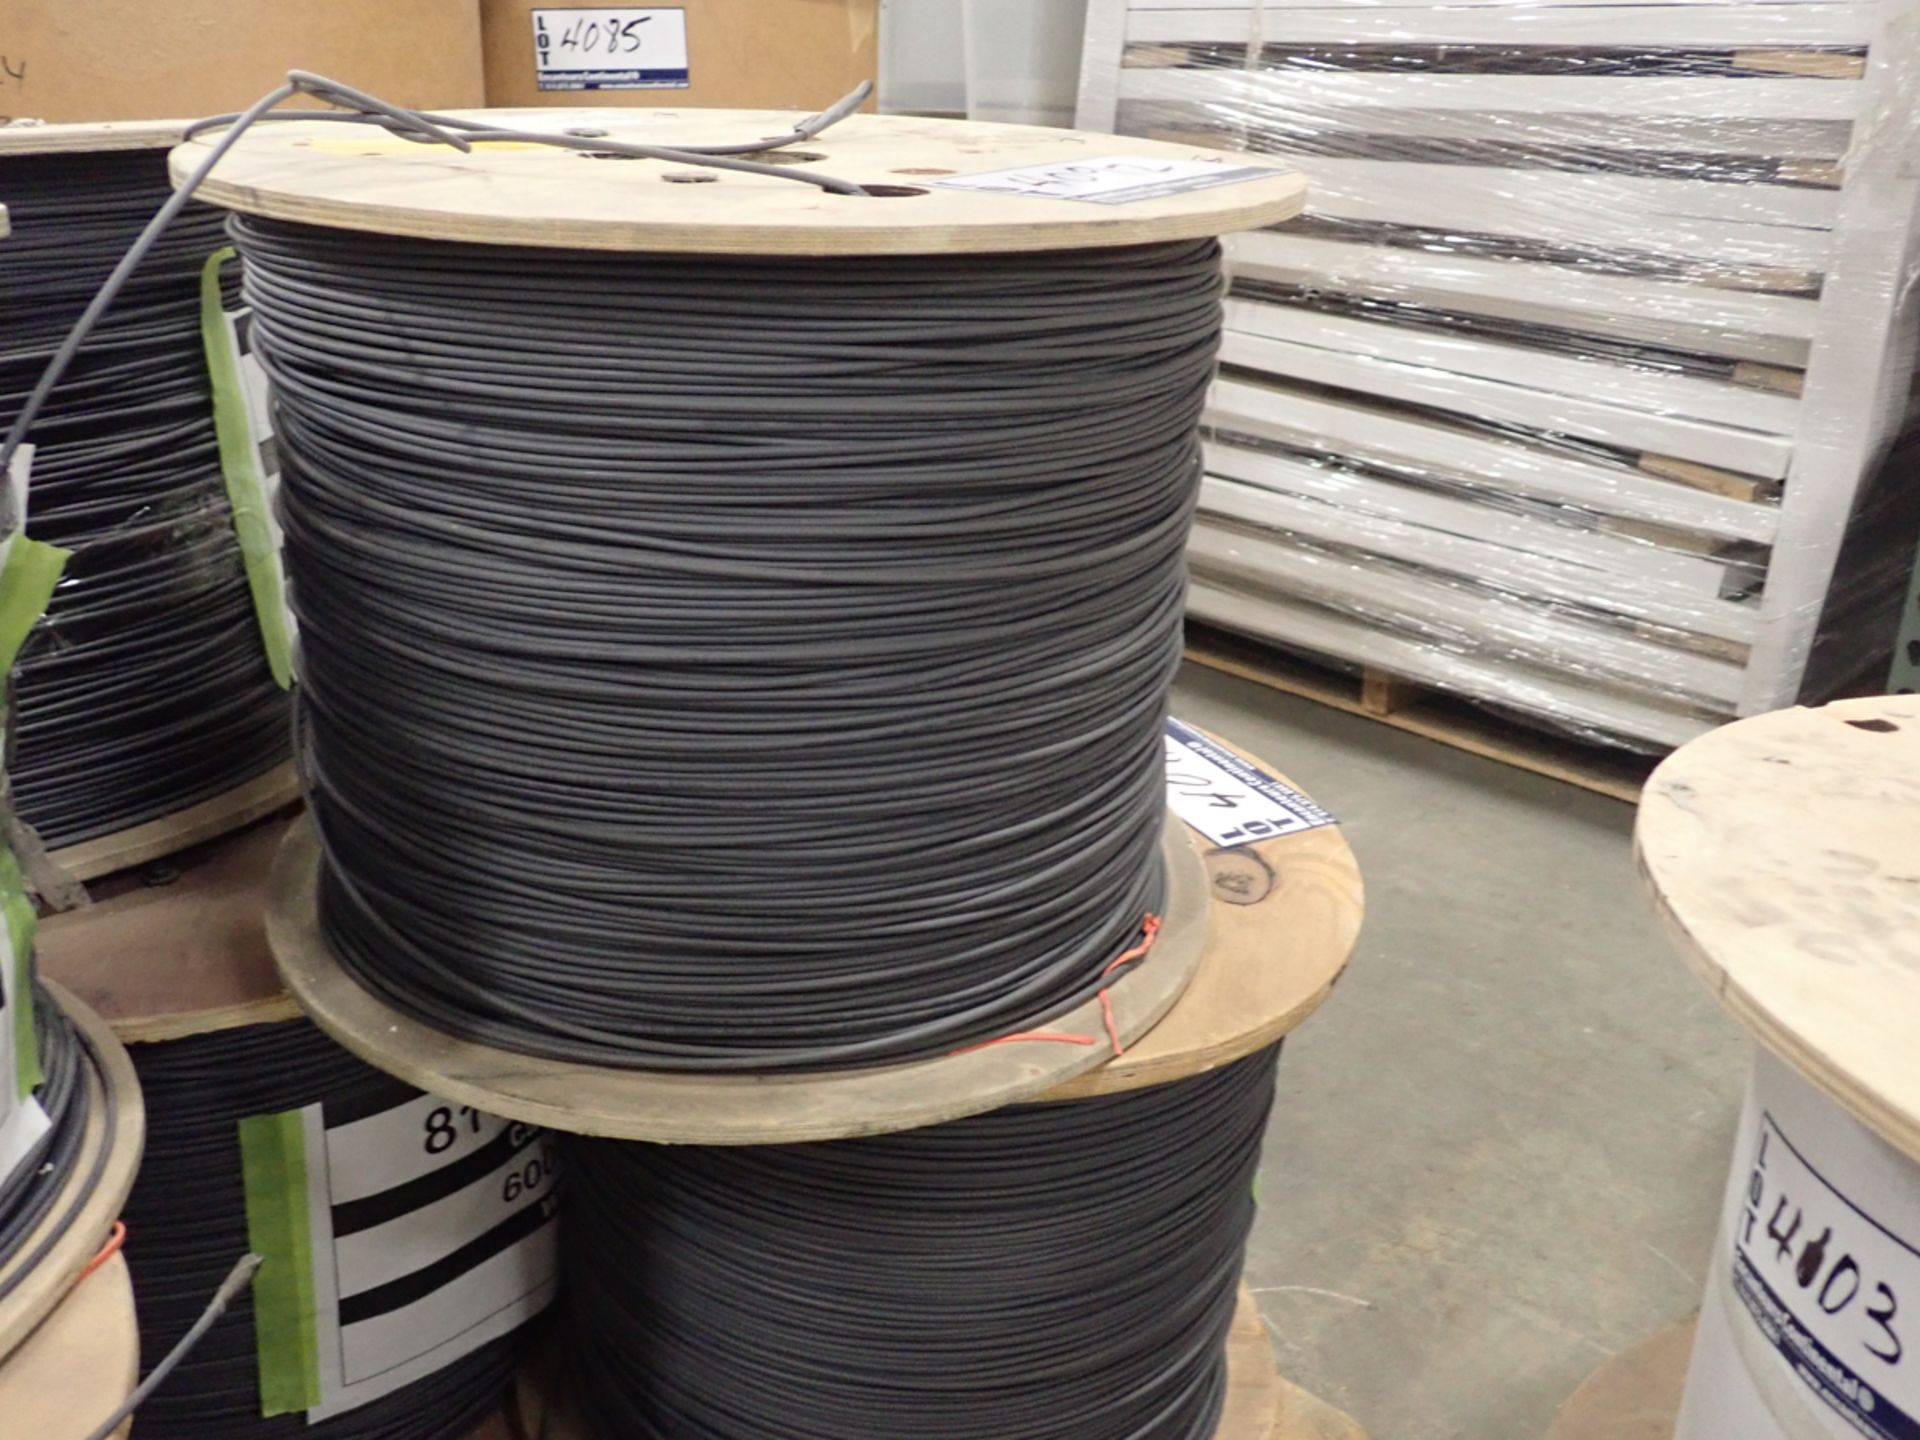 WIRE XLPO 14AWG 19X27 600V 110-125DEG C, 6000 FT, TOTAL WEIGHT 43KG (81080067S) - Image 6 of 14